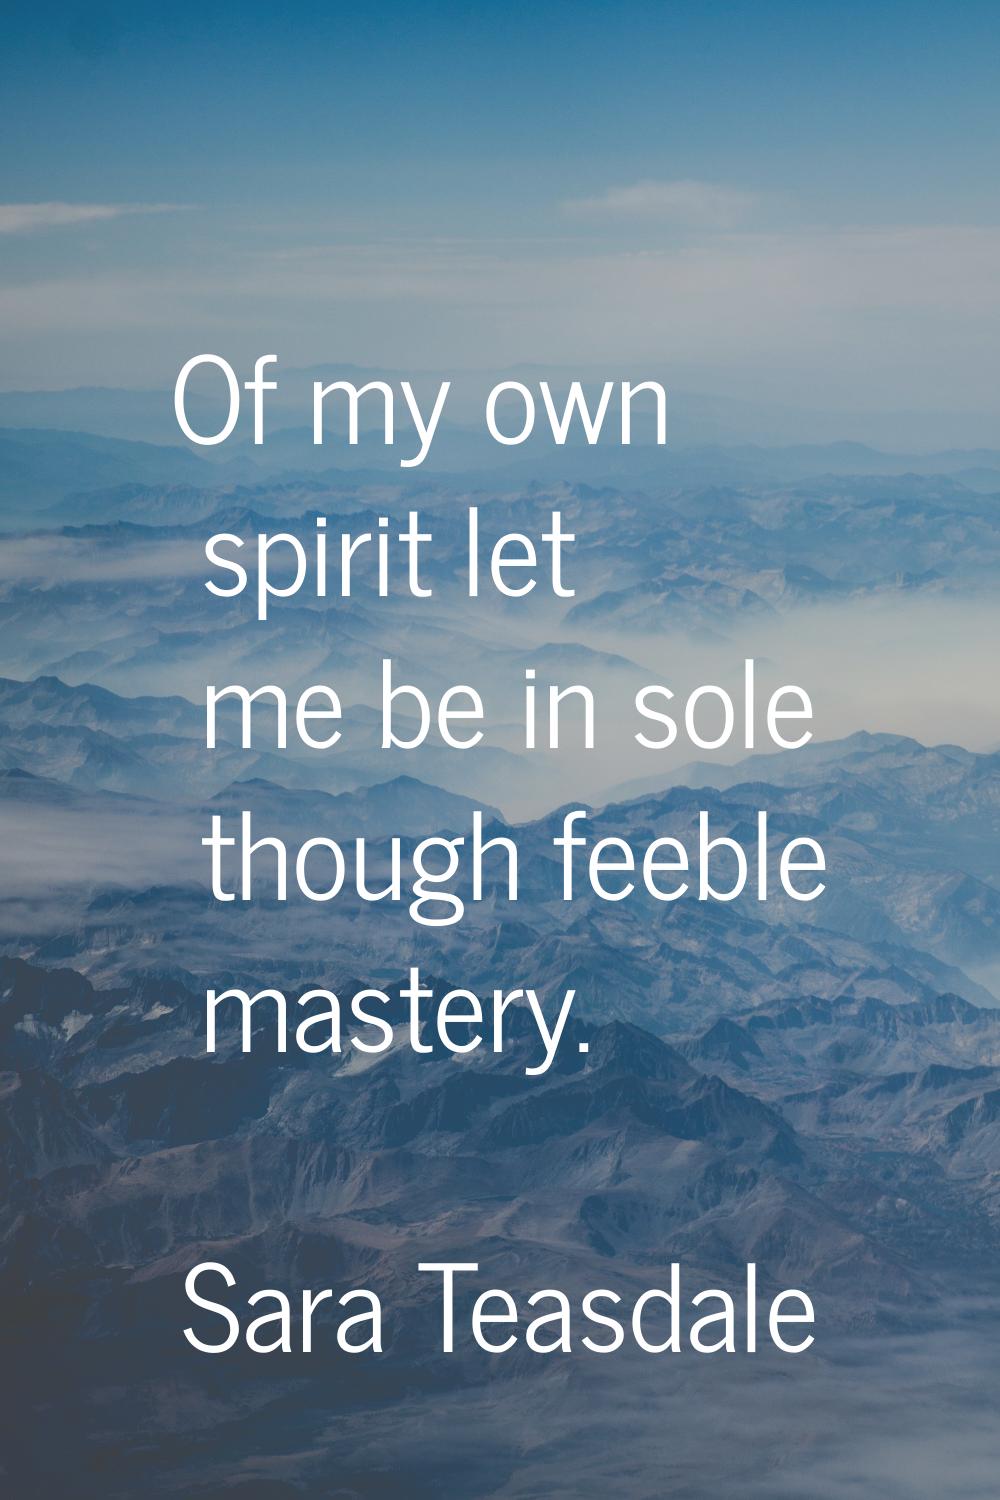 Of my own spirit let me be in sole though feeble mastery.